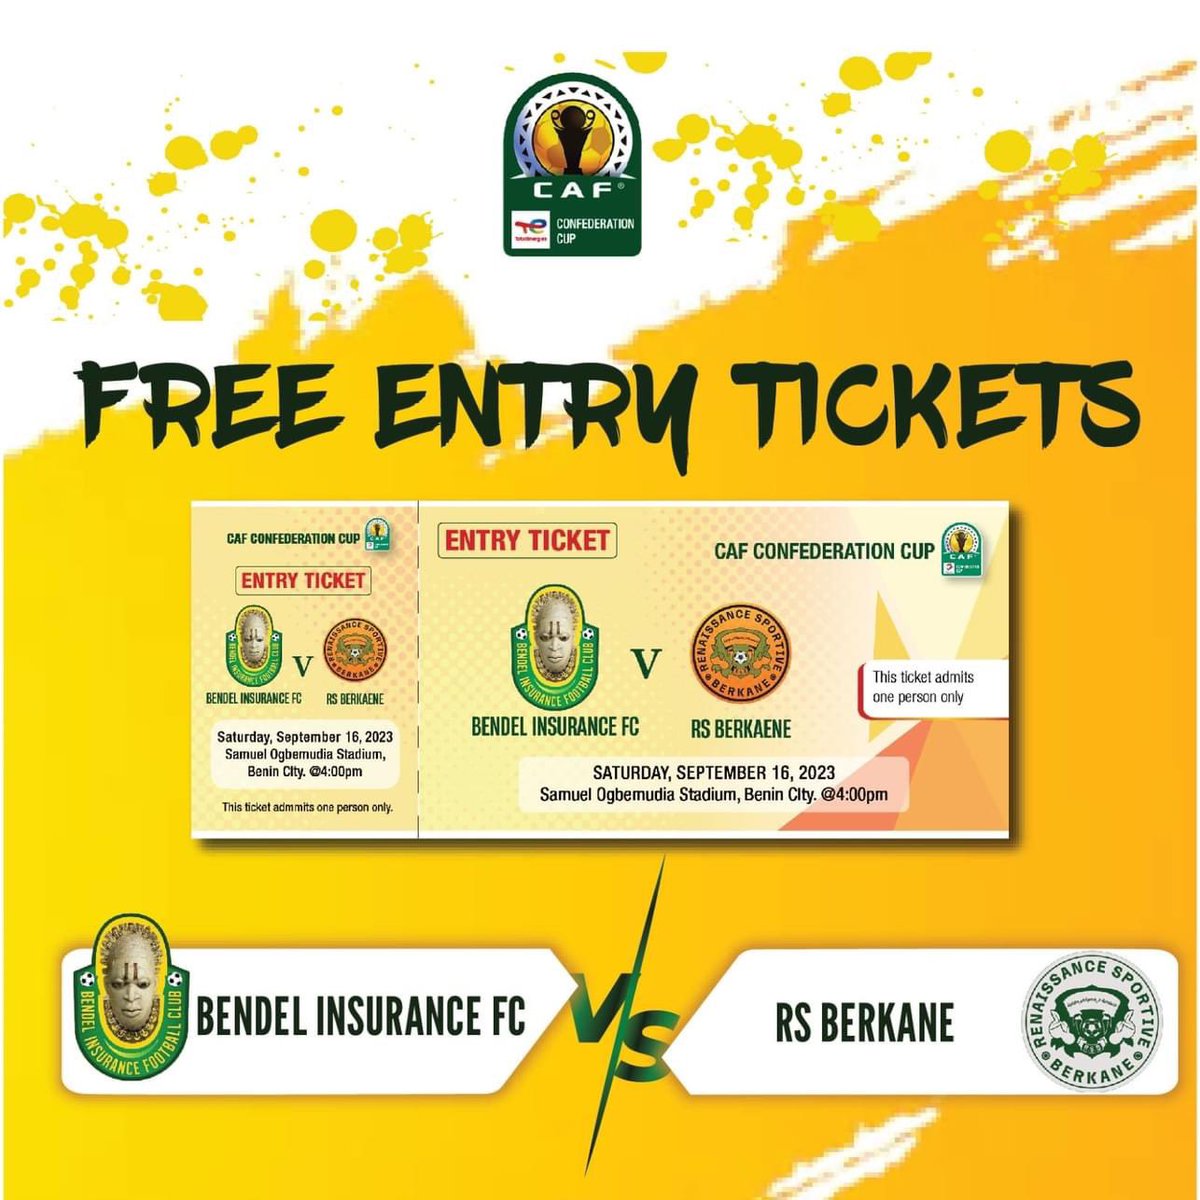 #DontMissOut • Below are important information you need to know about tomorrow's game ahead of CAF Confederation Cup qualifier match between @BendelInsurance and RC Berkane of Morocco, #ECO #MatchDay #CAFConfederationCup #InvestInEdo #EdoMEGA